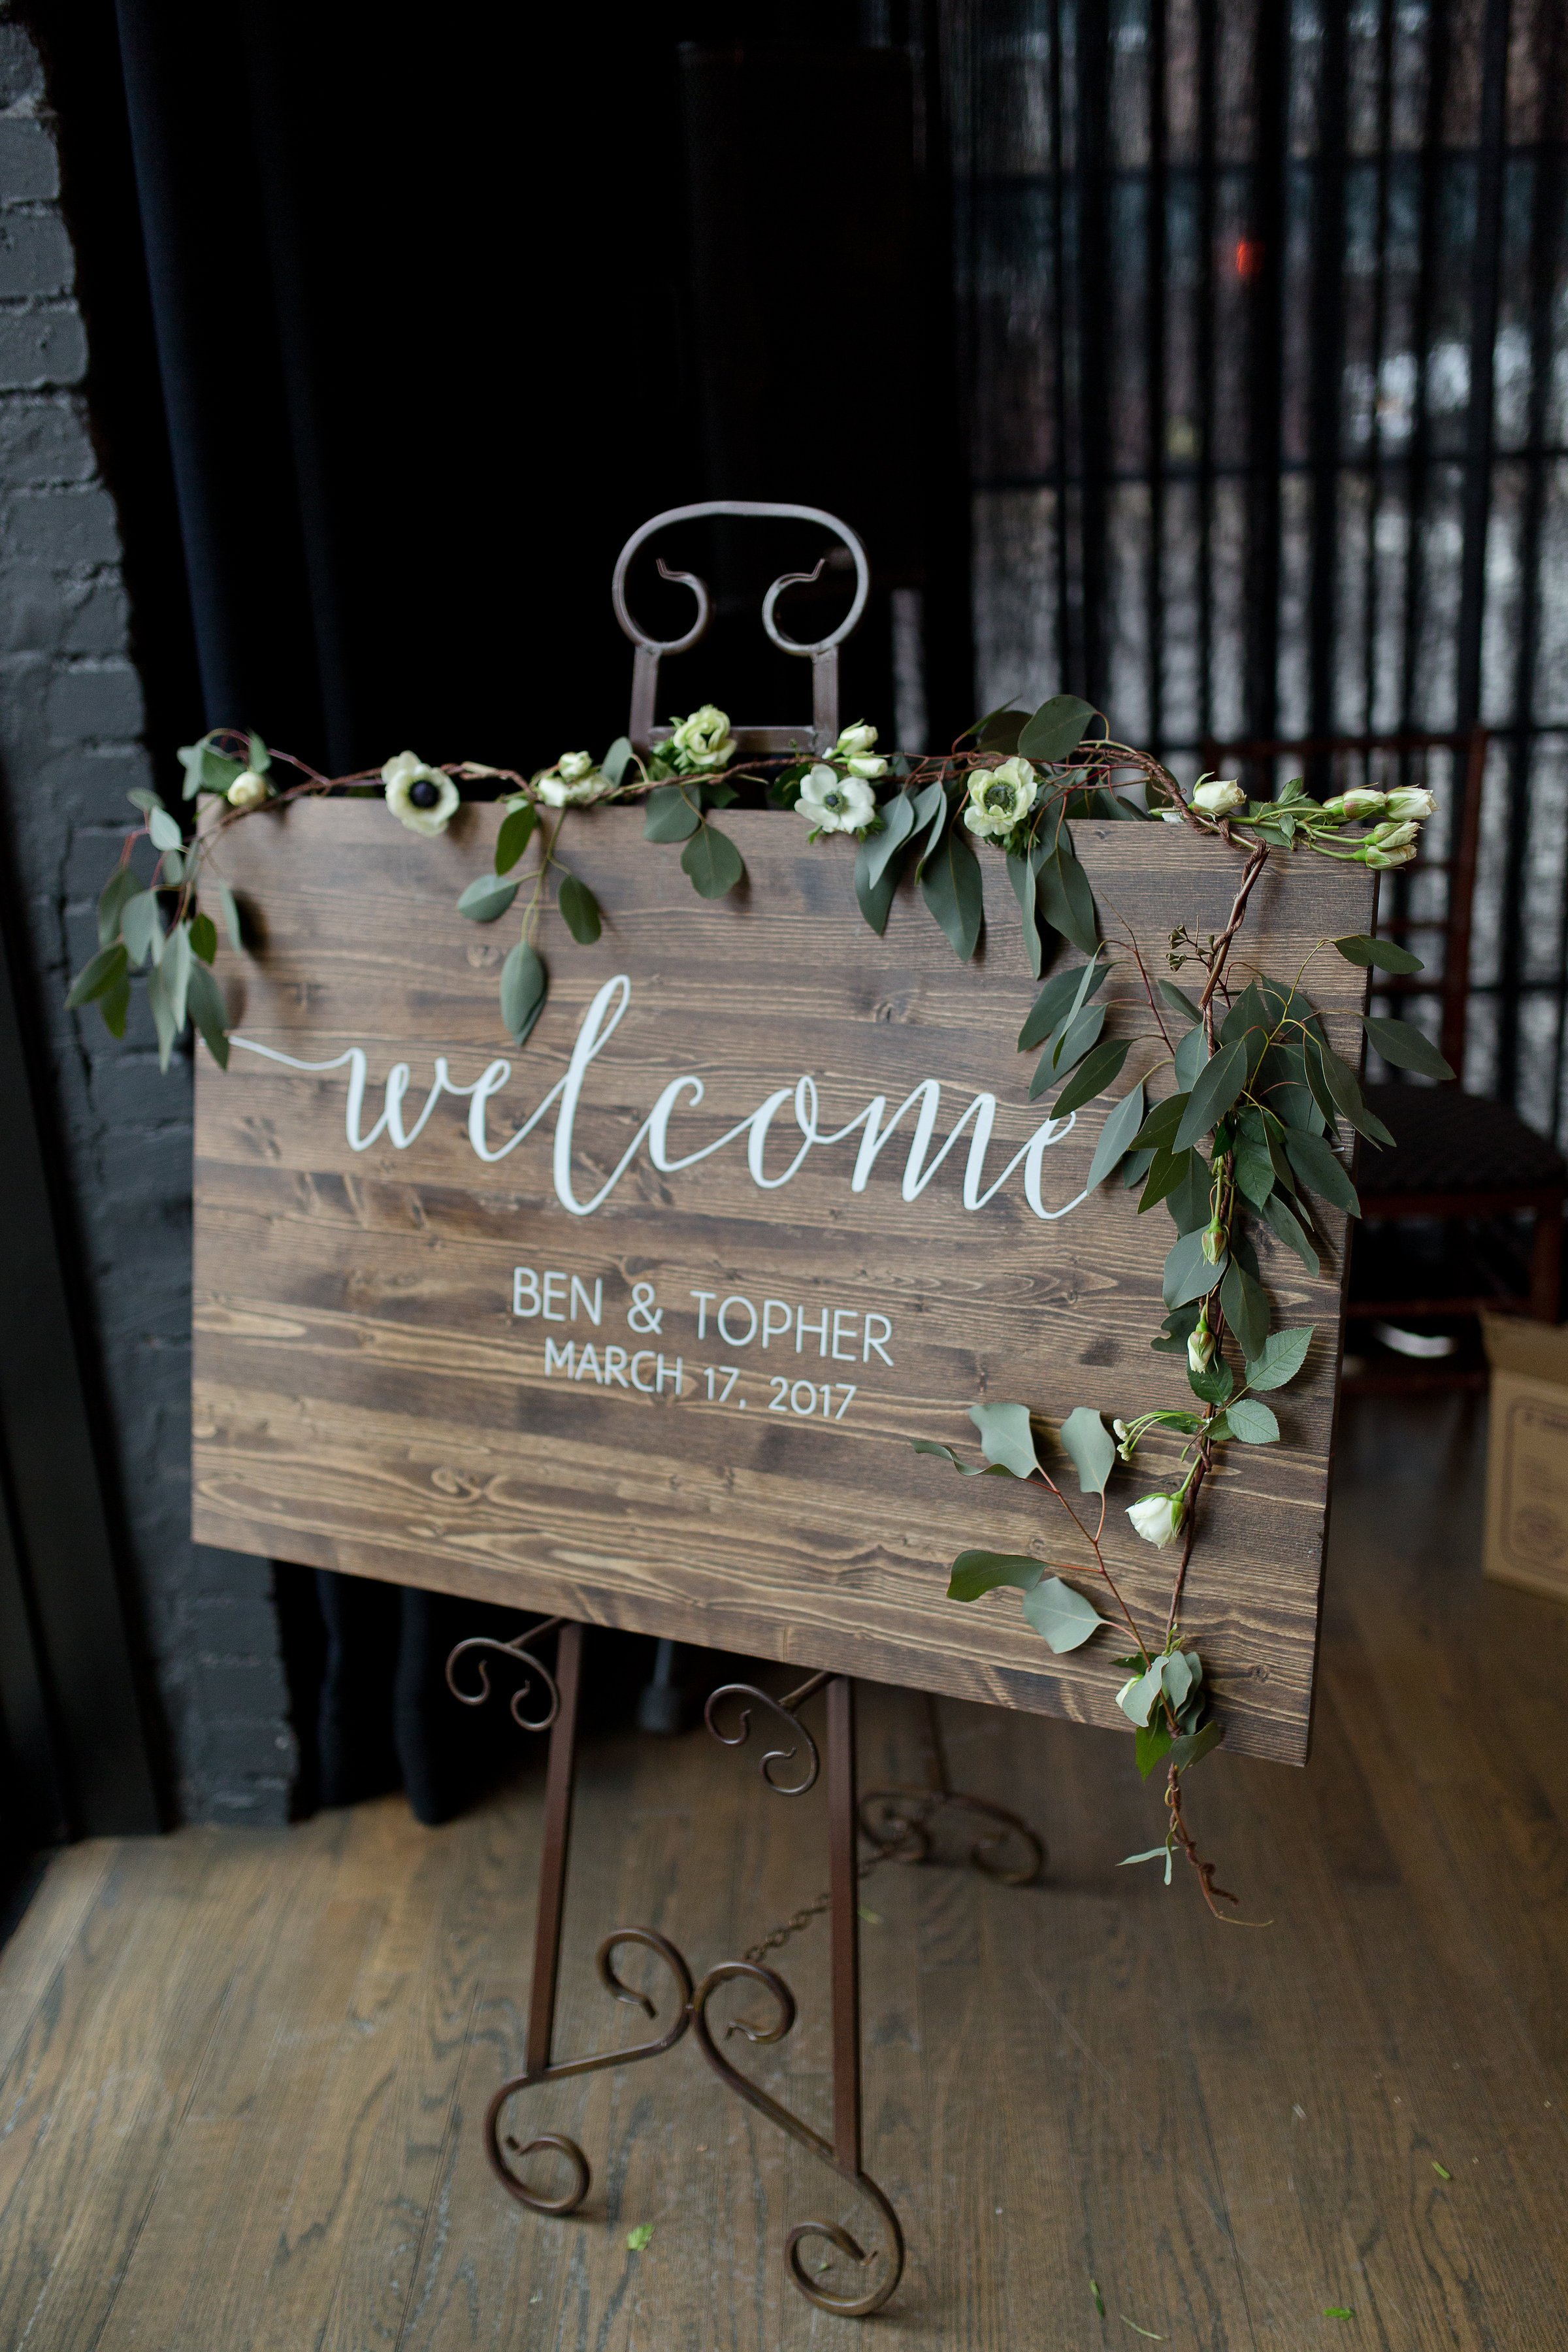  A welcome sign written on a wooden board and decorated with flowers at the entrance of a wedding reception. The sign reads “Welcome Ben &amp; Topher, March 17, 2017” 